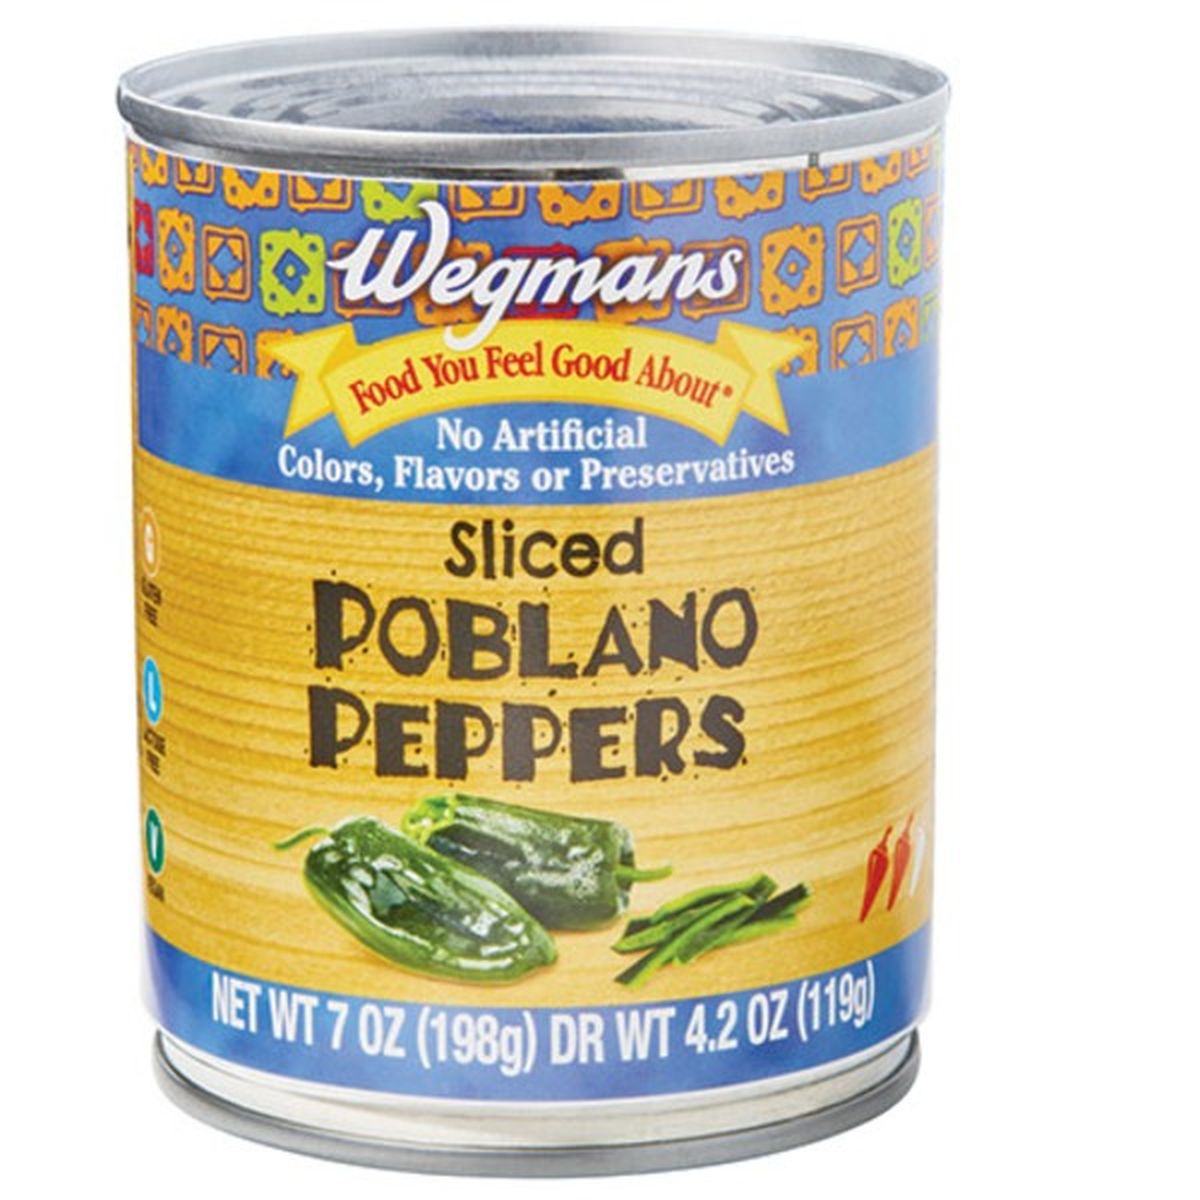 Calories in Wegmans Sliced Poblano Peppers